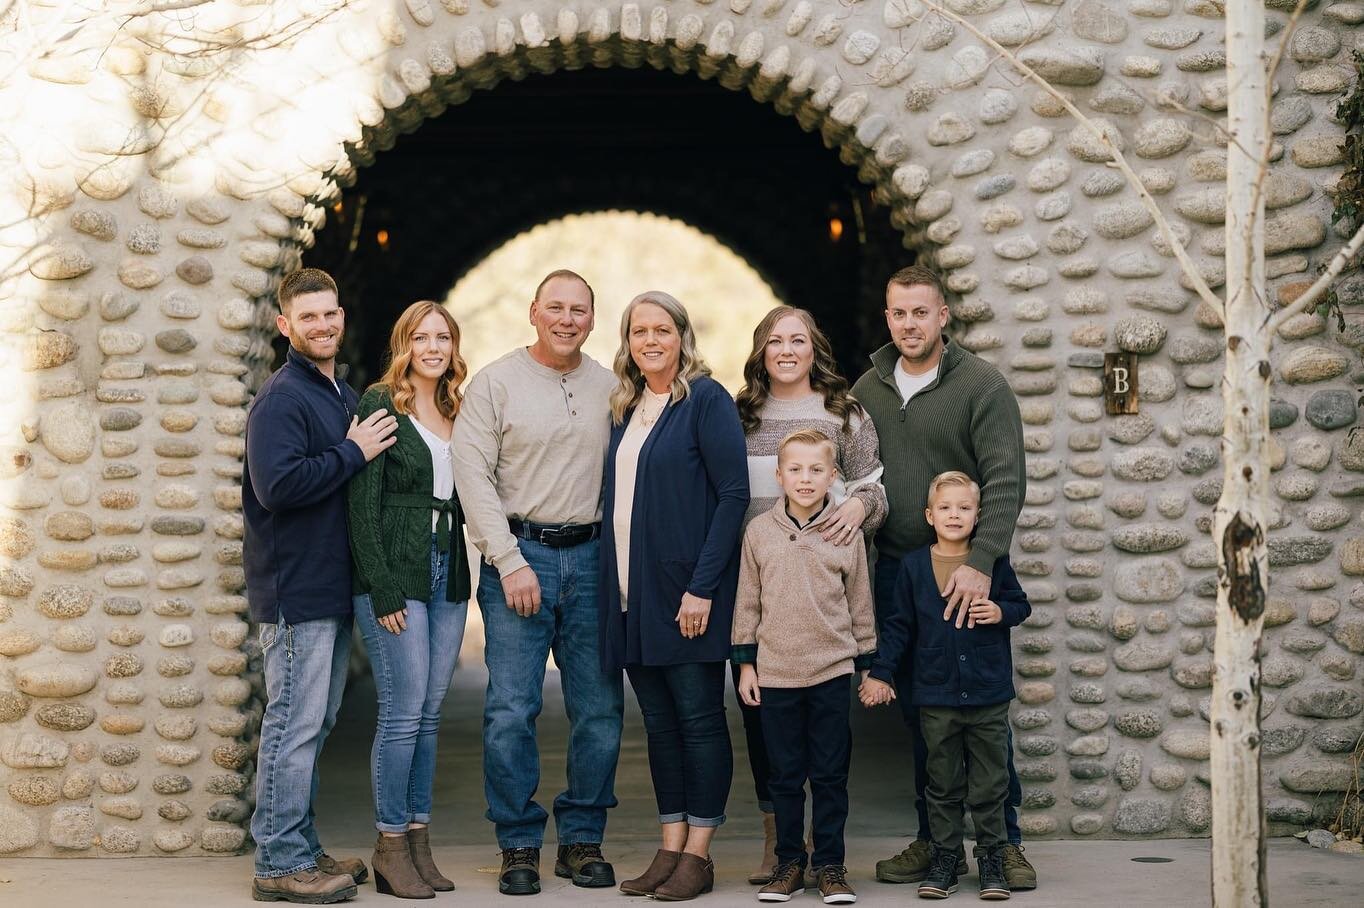 It was so fun to get to photograph this family yesterday! Everyone convened in Colorado for Thanksgiving from all over the country, which is THE BEST. There were way too many good ones to choose from, so here's my best try at picking a few.